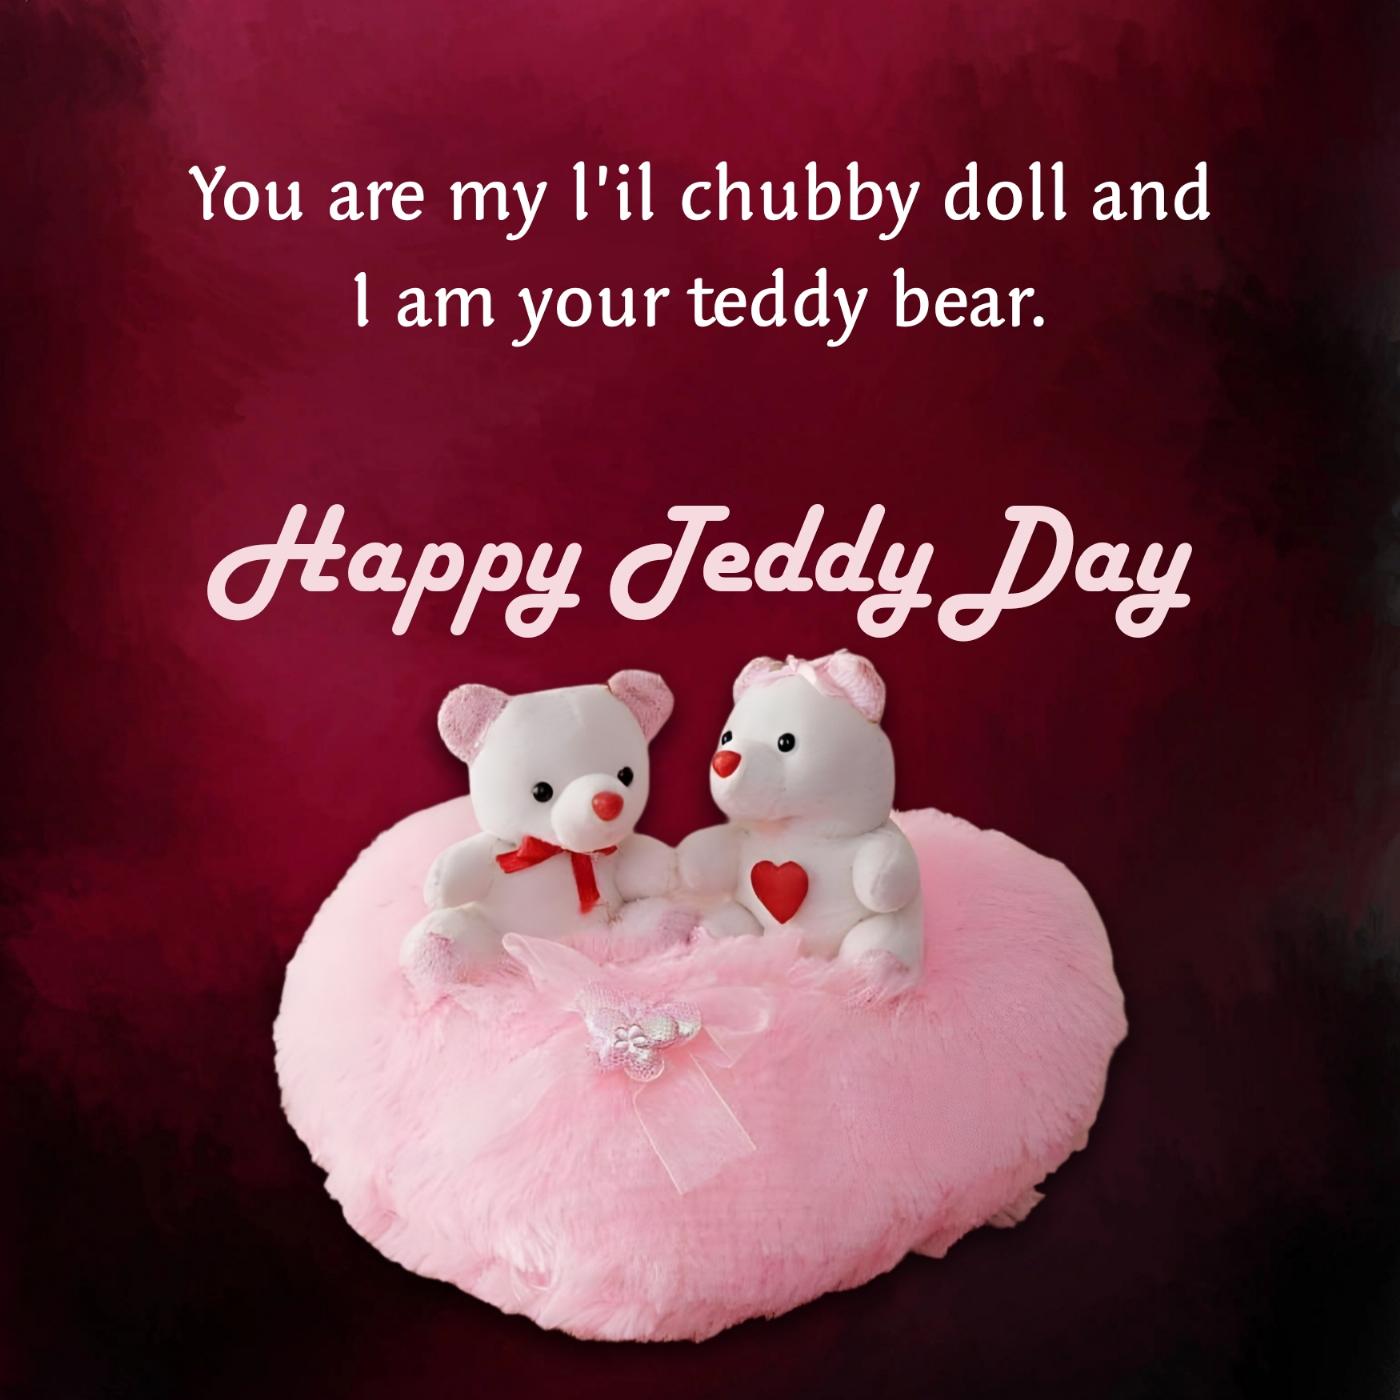 You are my lil chubby doll and I am your teddy bear